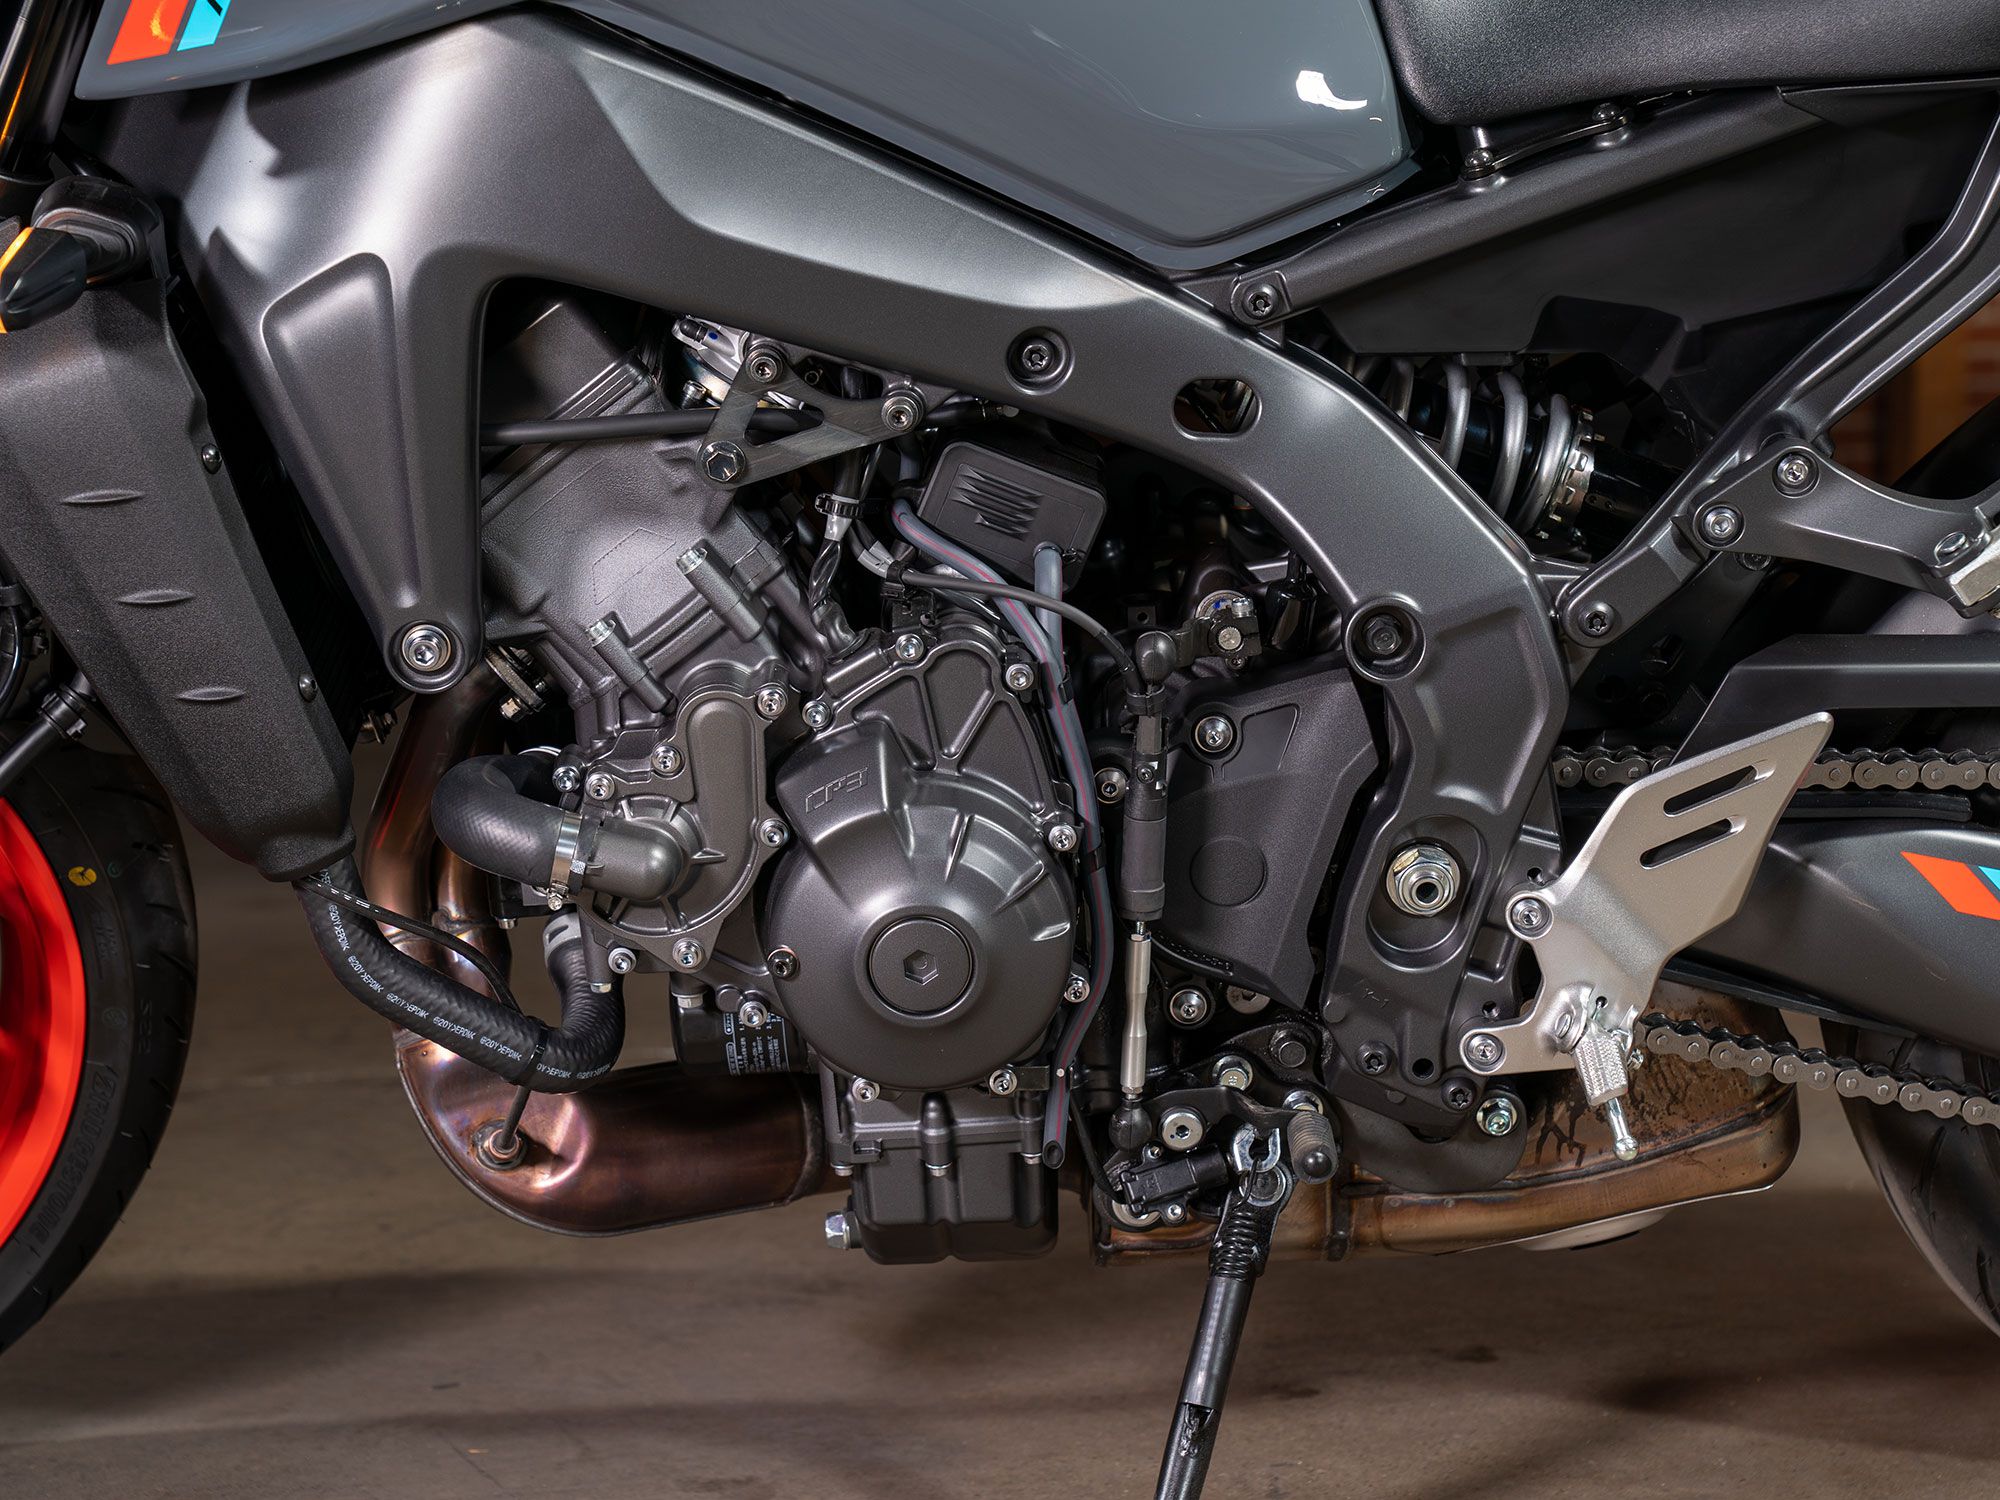 The 2021 MT-09 is powered by a 43cc larger CP3 engine that now displaces 890cc.